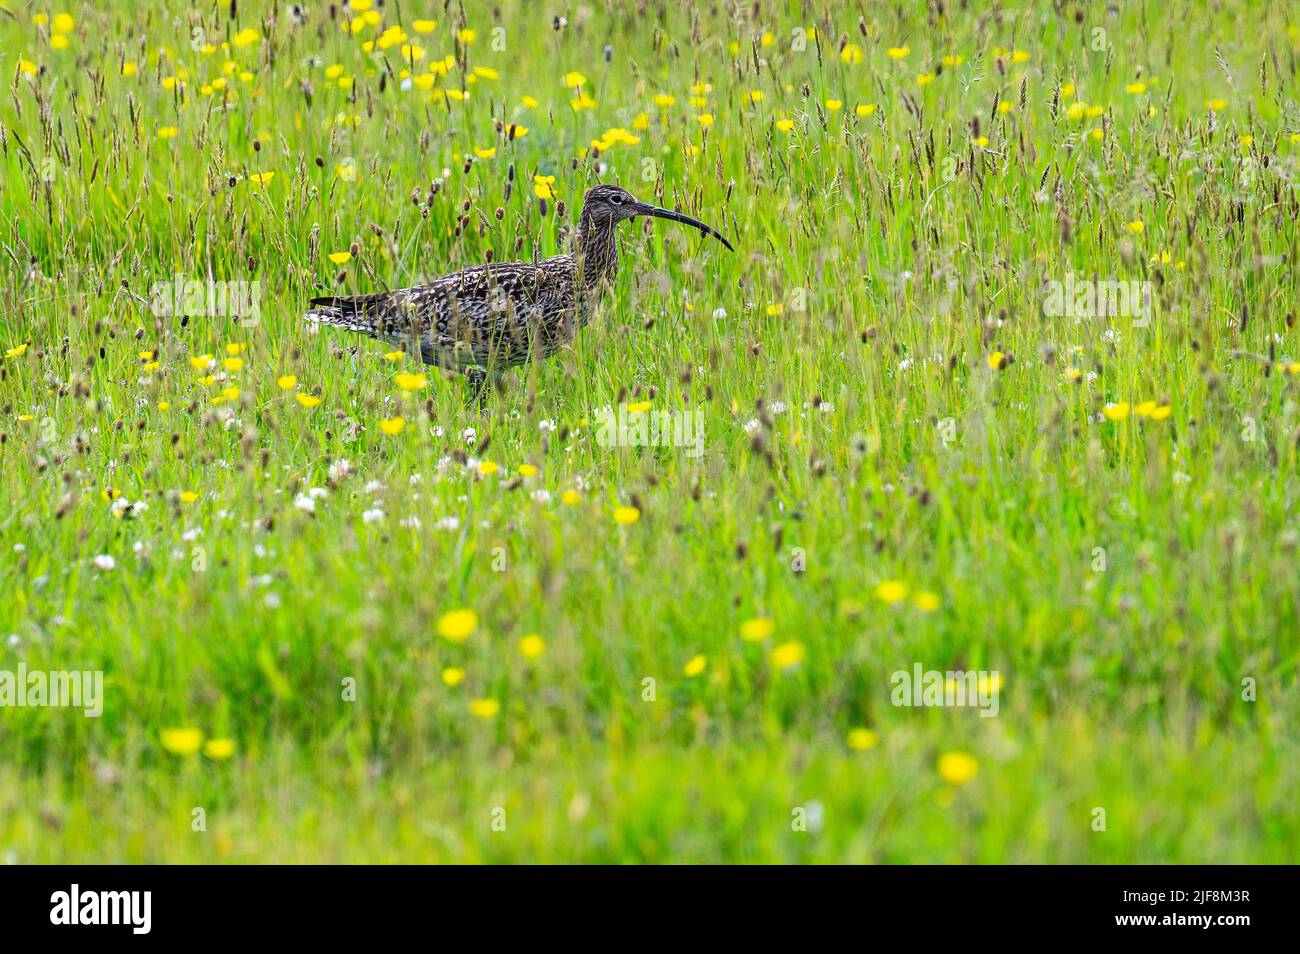 Un curlew foraging nelle erbe lunghe, Eday, Isole Orkney Foto Stock